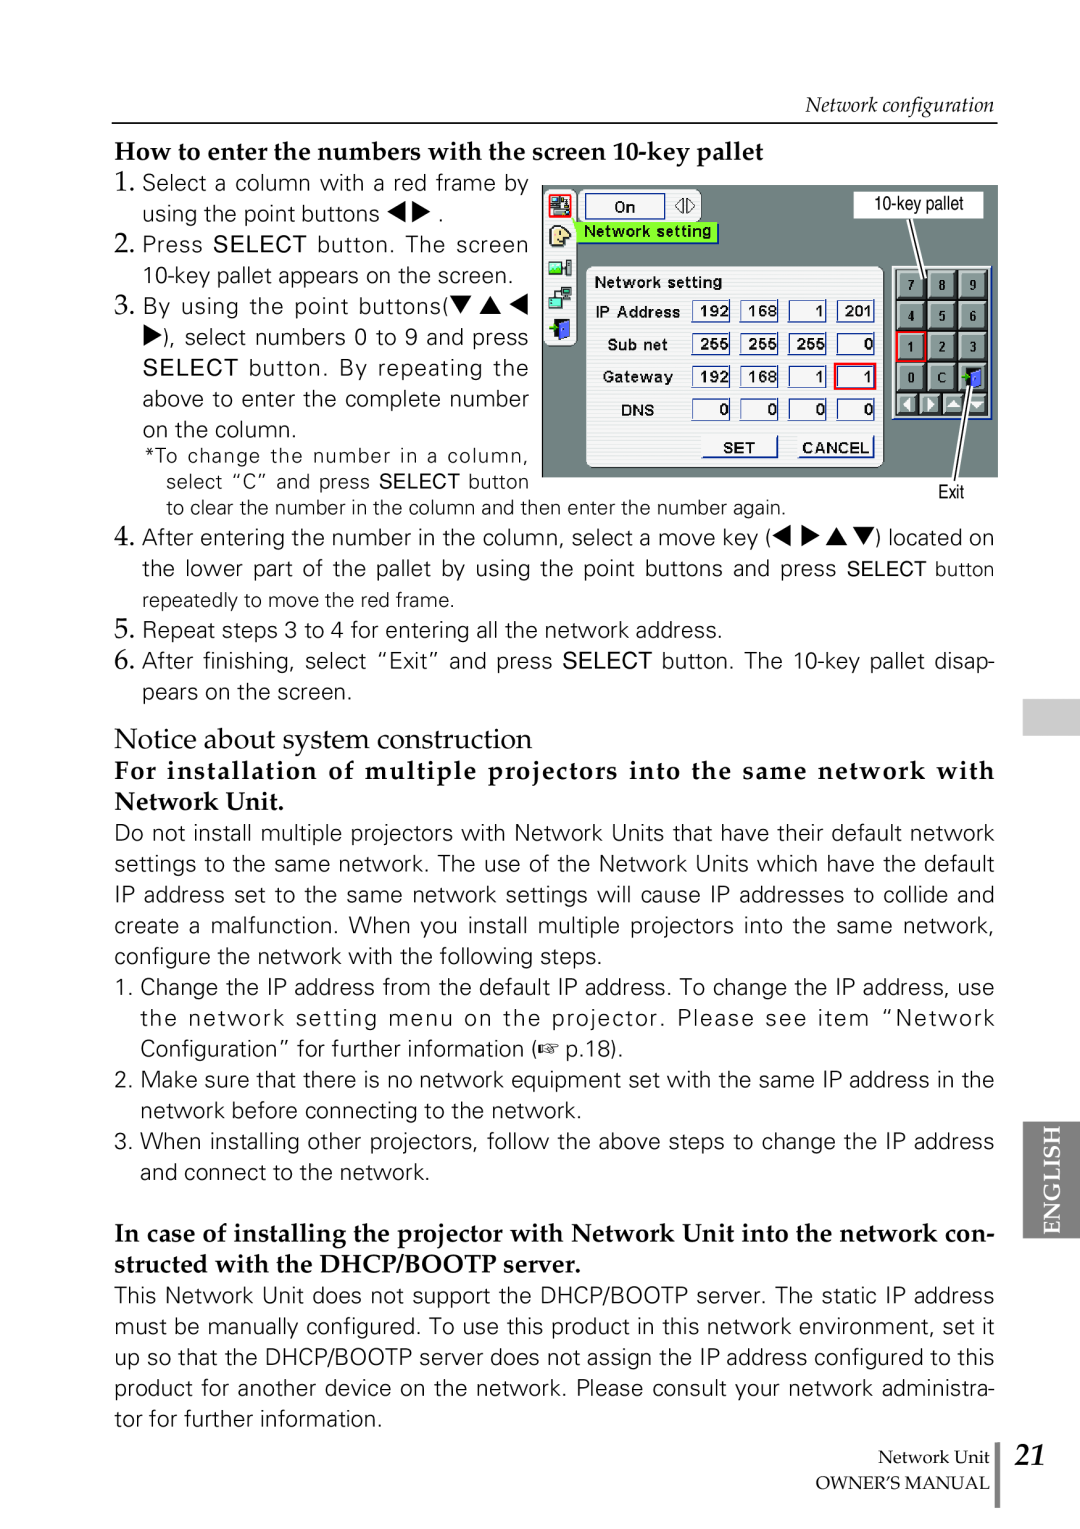 Eiki PjNET-20 owner manual Notice about system construction, How to enter the numbers with the screen 10-key pallet 